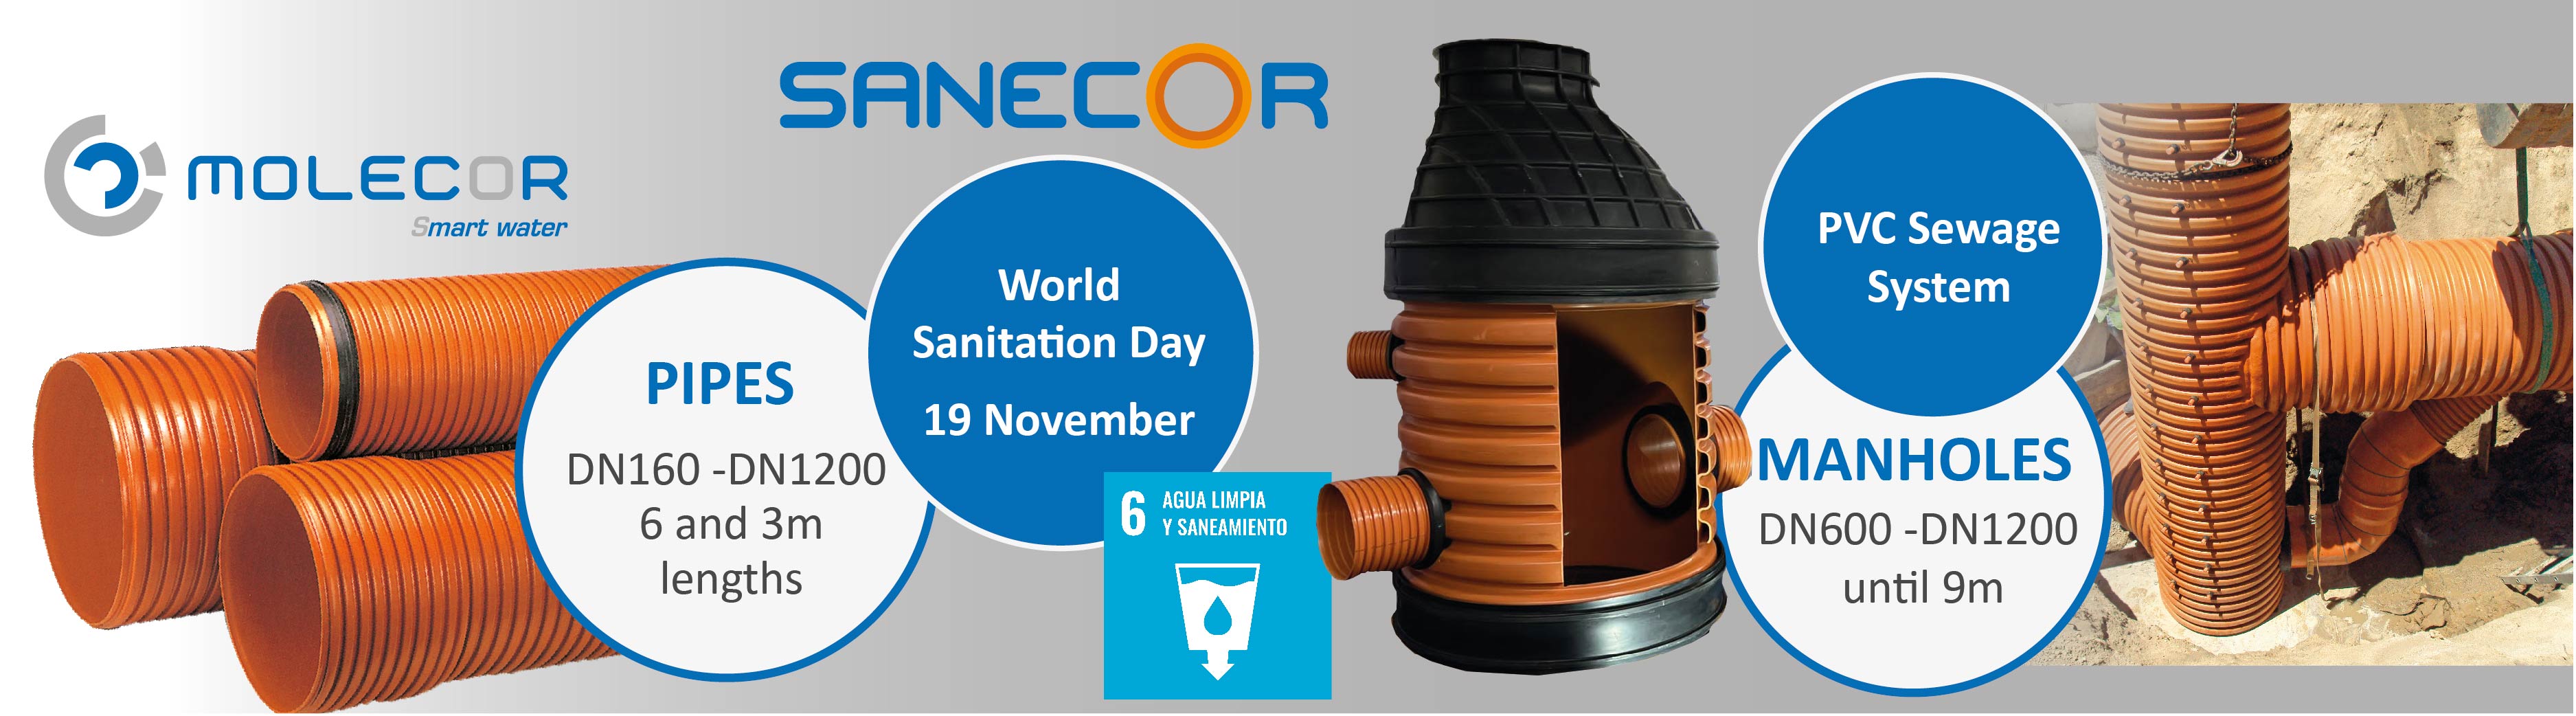 World Sanitation Day. Molecor's purpose: to improve people's quality of life by making affordable water available to them